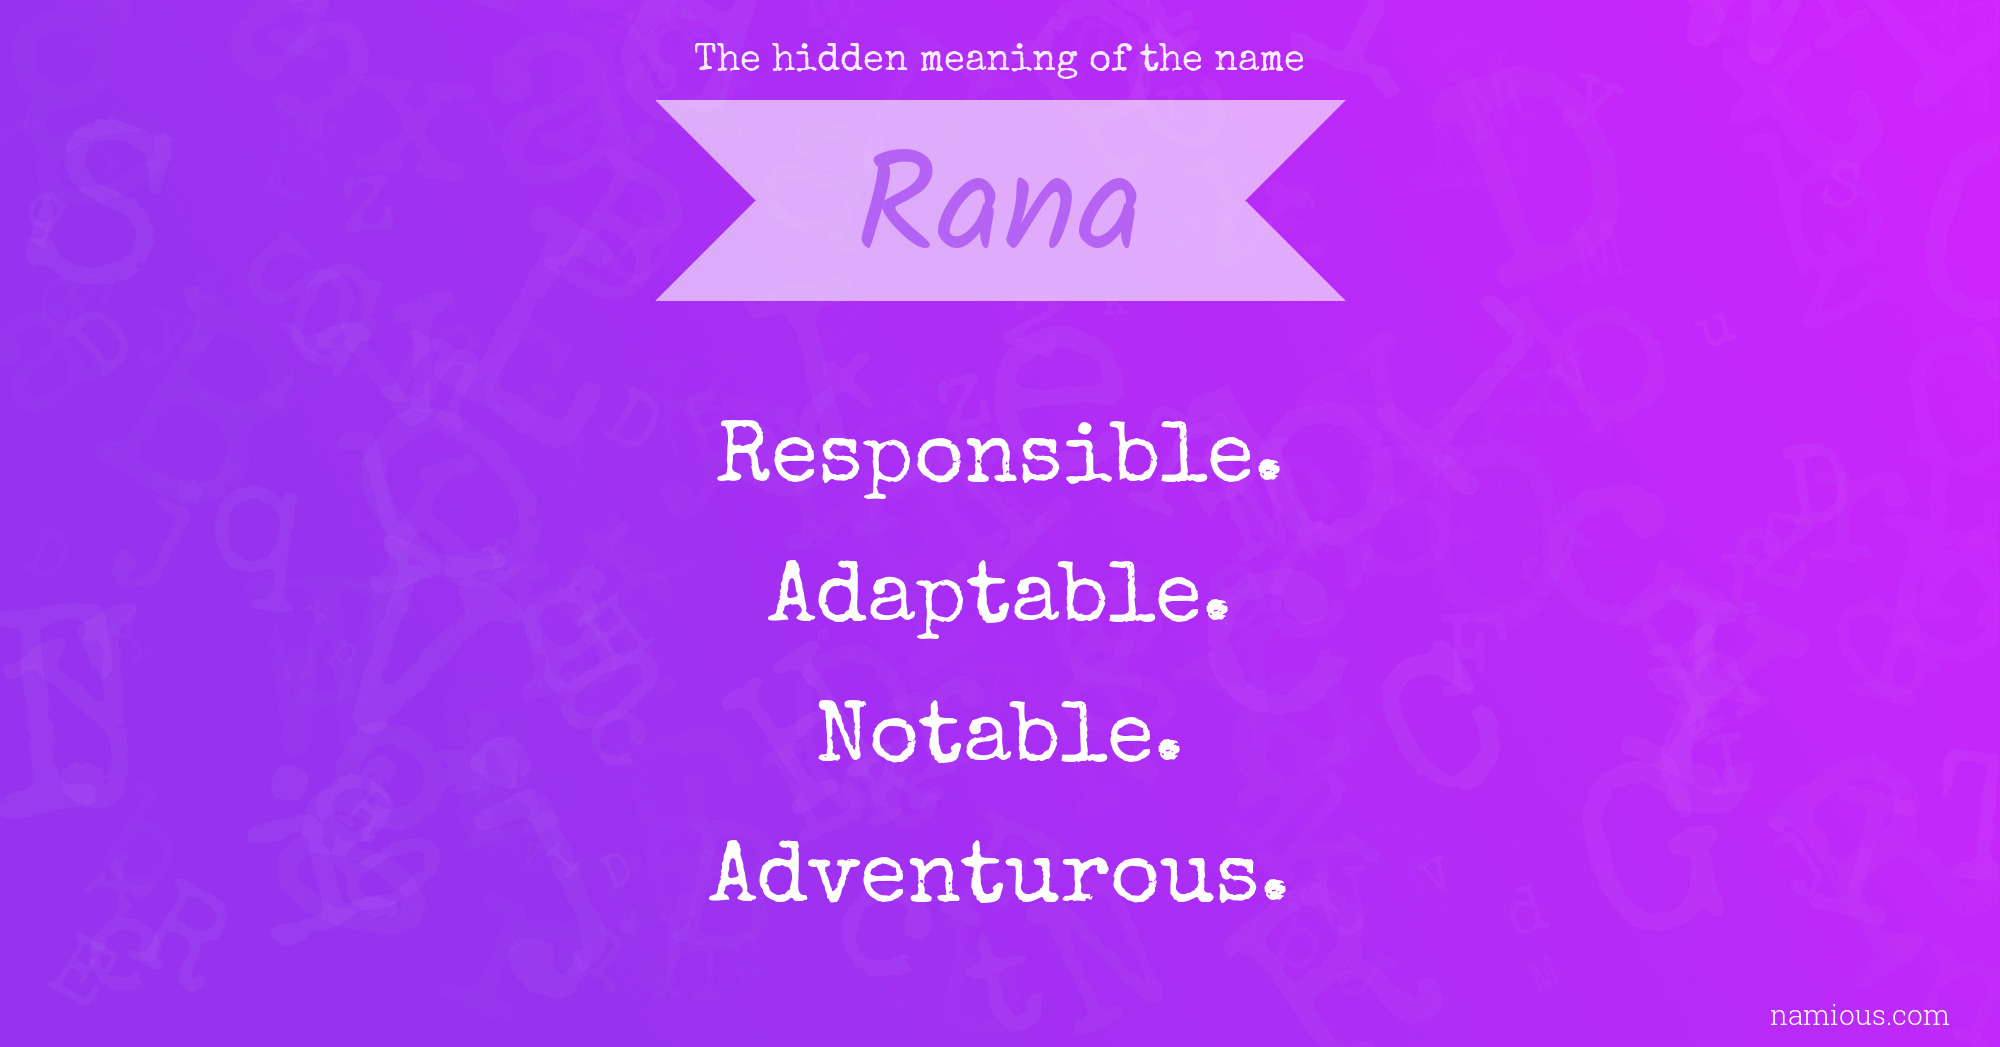 The hidden meaning of the name Rana